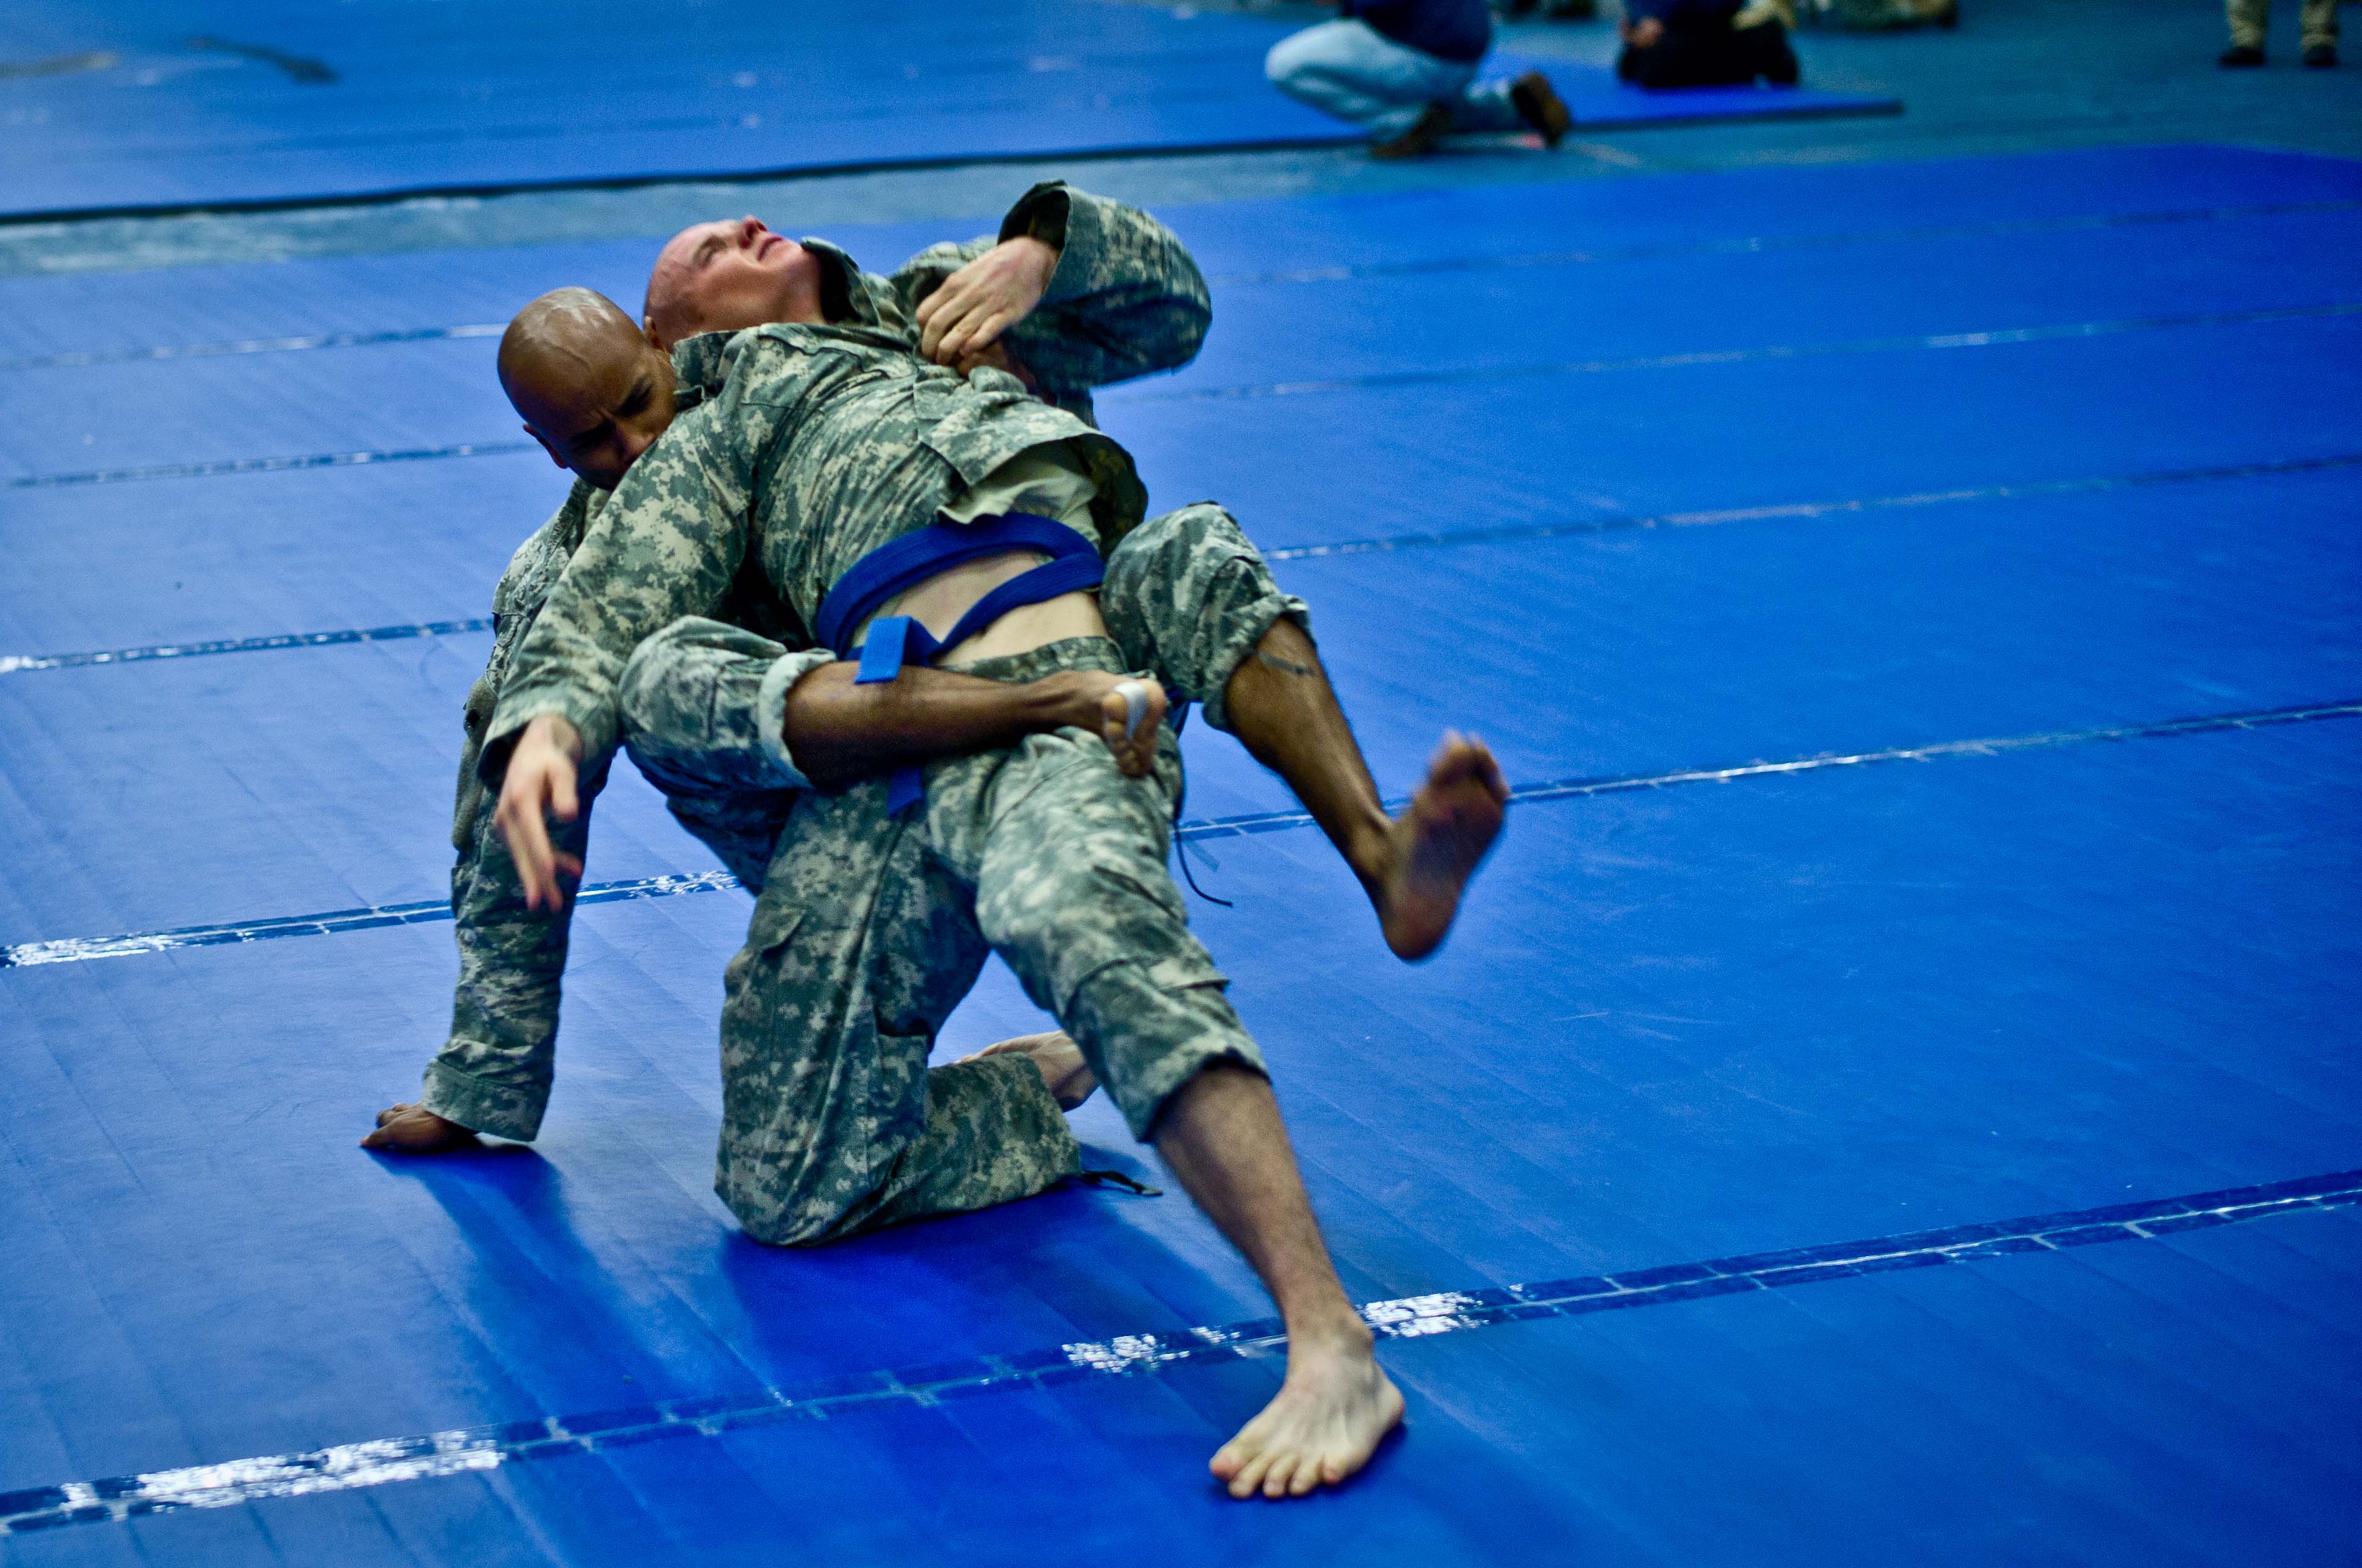 20120213-A-RE761-003: Staff Sgt. Carlos O. Padilla, a civil affairs noncommissioned officer assigned to Headquarters and Headquarters Company, 85th Civil Affairs Brigade attempts to apply a choke hold on his opponent during the 2012 Fort Hood Combatives Championship preliminaries Feb. 13 at the Abrams Physical Fitness Center on base. (Photo by Staff Sgt. Michael J. Dator, 85th Civil Affairs Brigade Public Affairs)